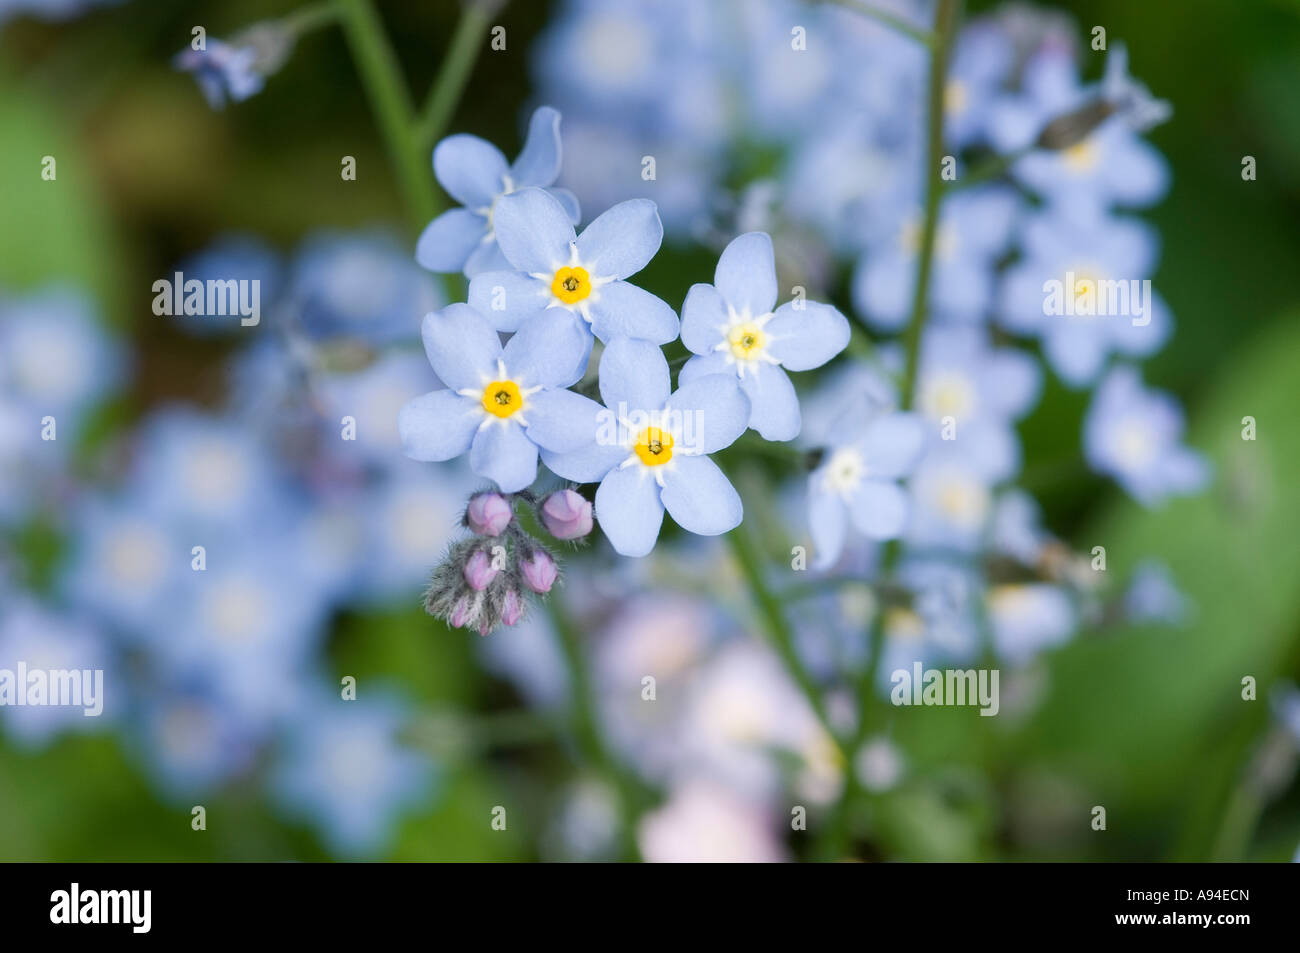 Forget me not flowers blue flower close up flowering growing in spring England UK United Kingdom GB Great Britain Stock Photo